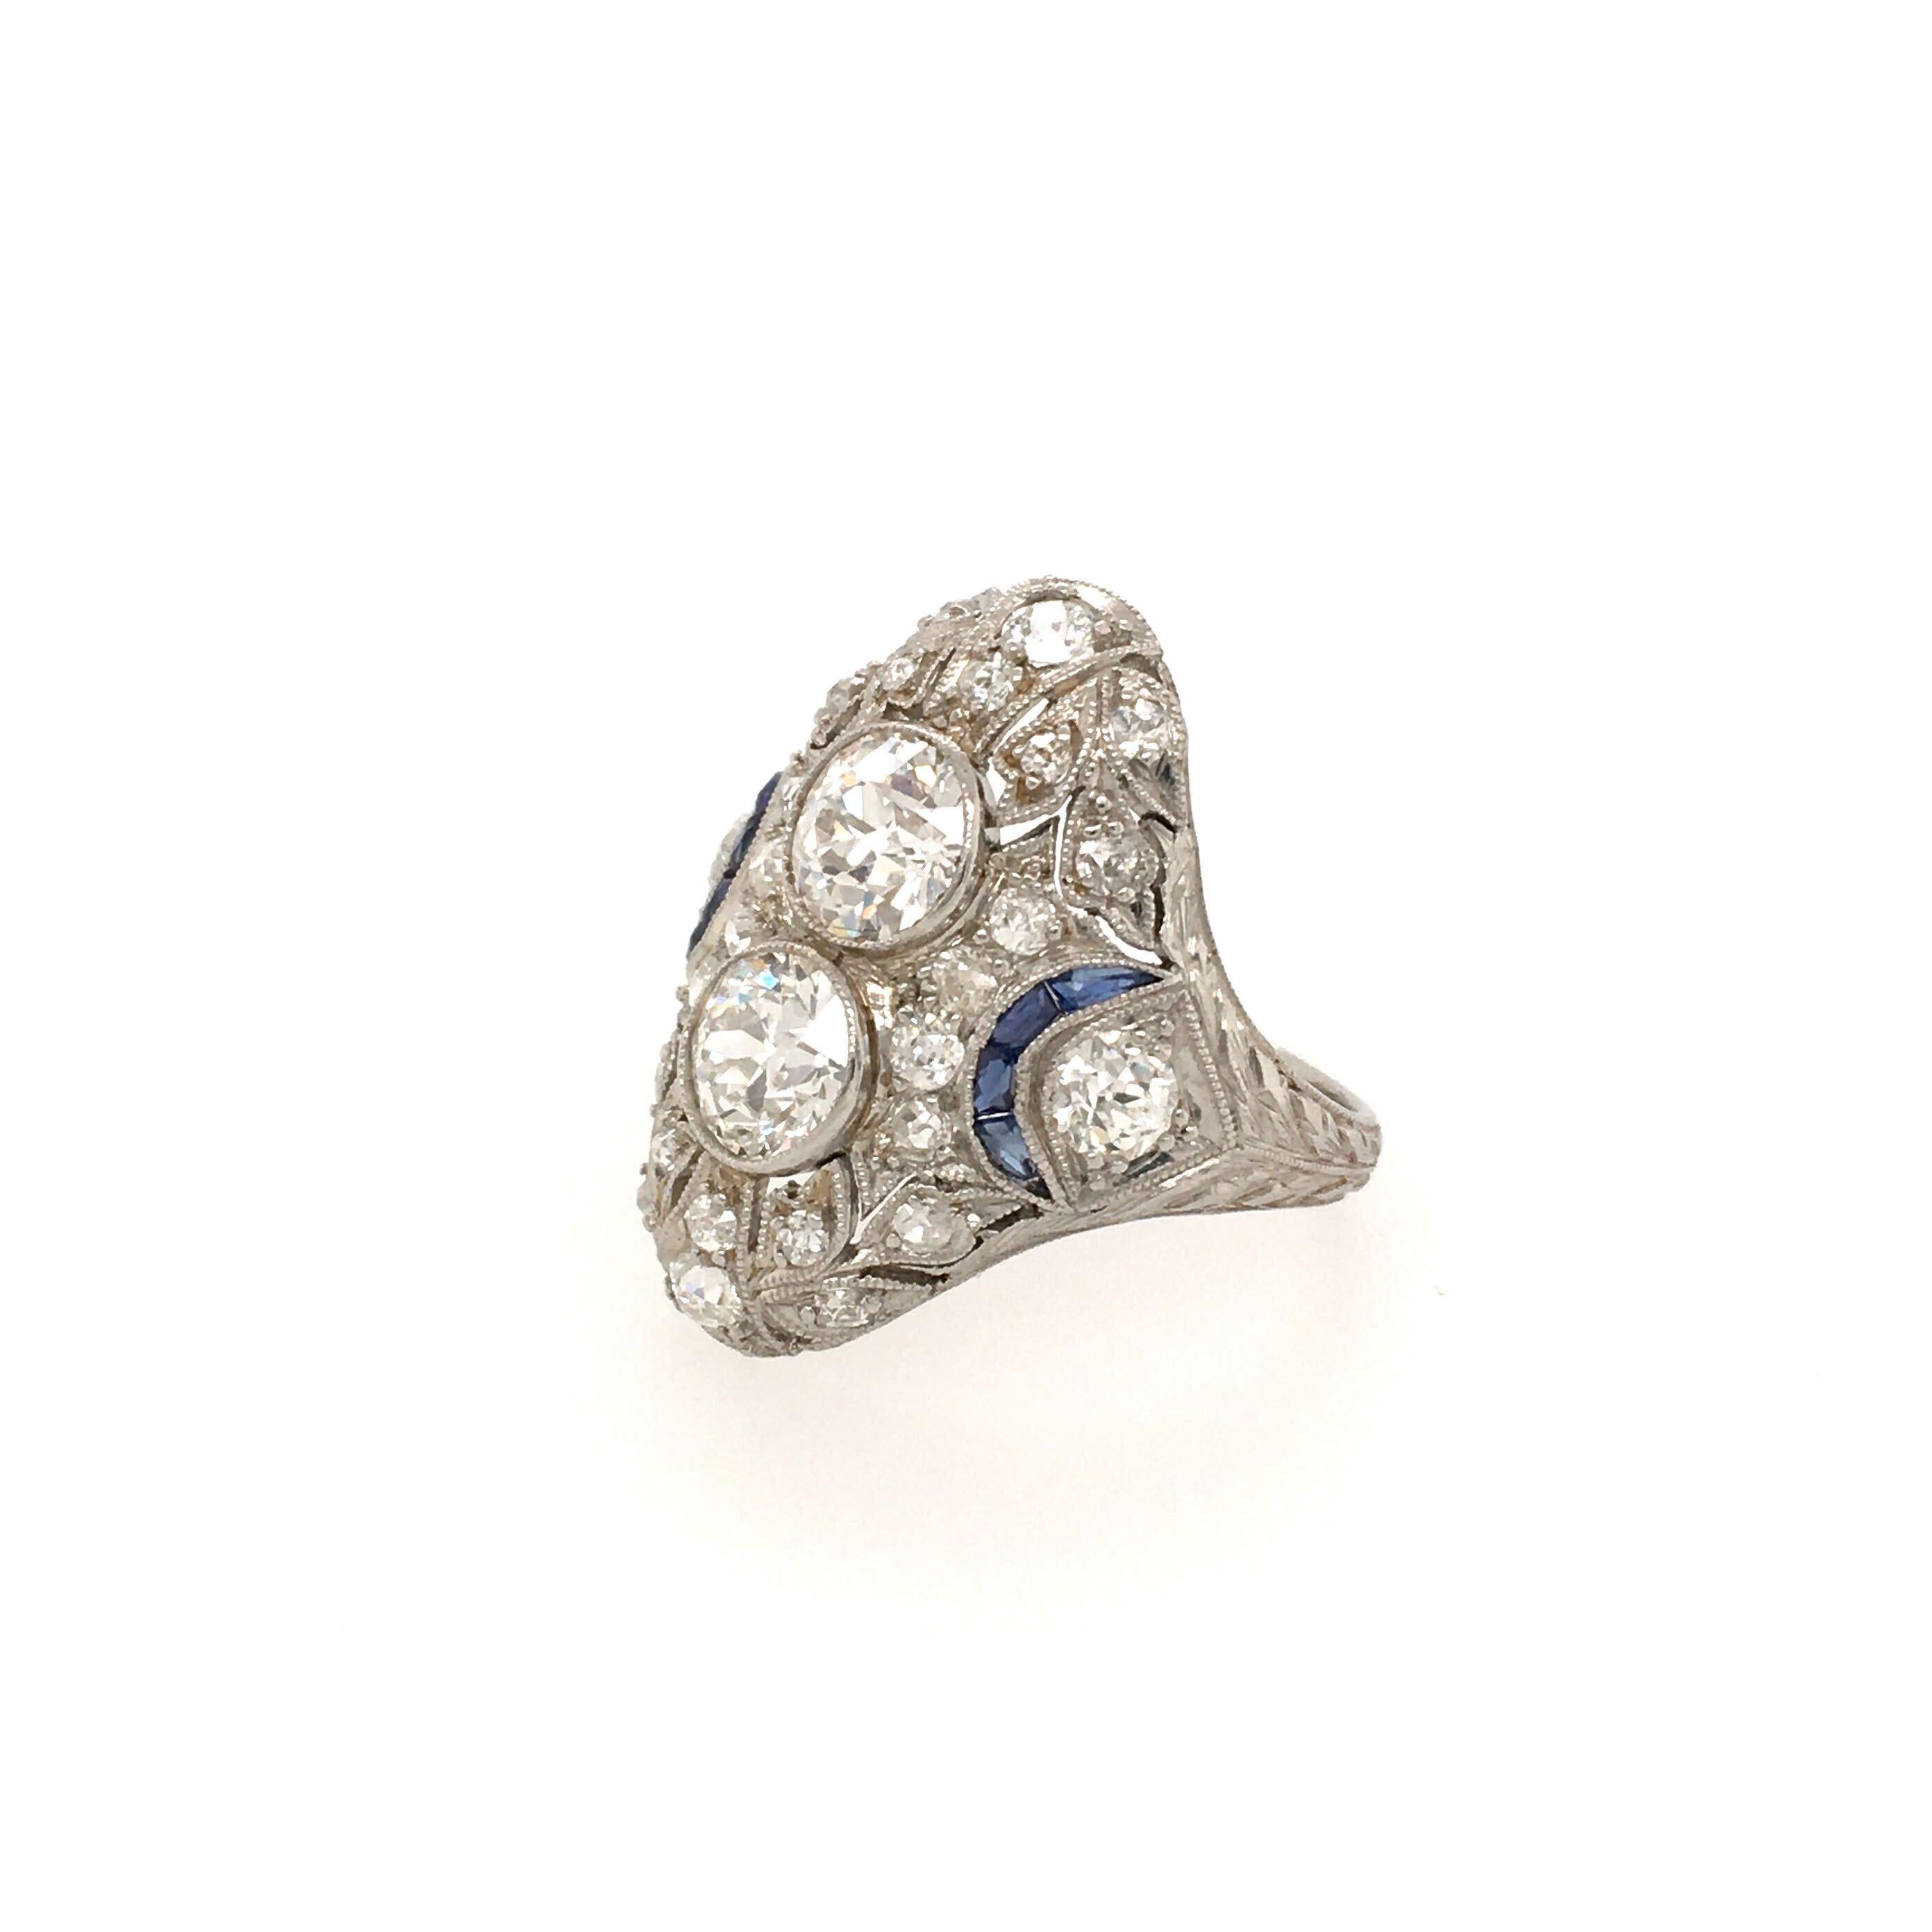 An Art Deco platinum, diamond and sapphire ring. Circa 1925. Designed as an oval pave set diamond plaque, centering two (2) old European cut diamonds, each weighing approximately 0.75 carats, enhanced by two (2) smaller old European cut diamonds and